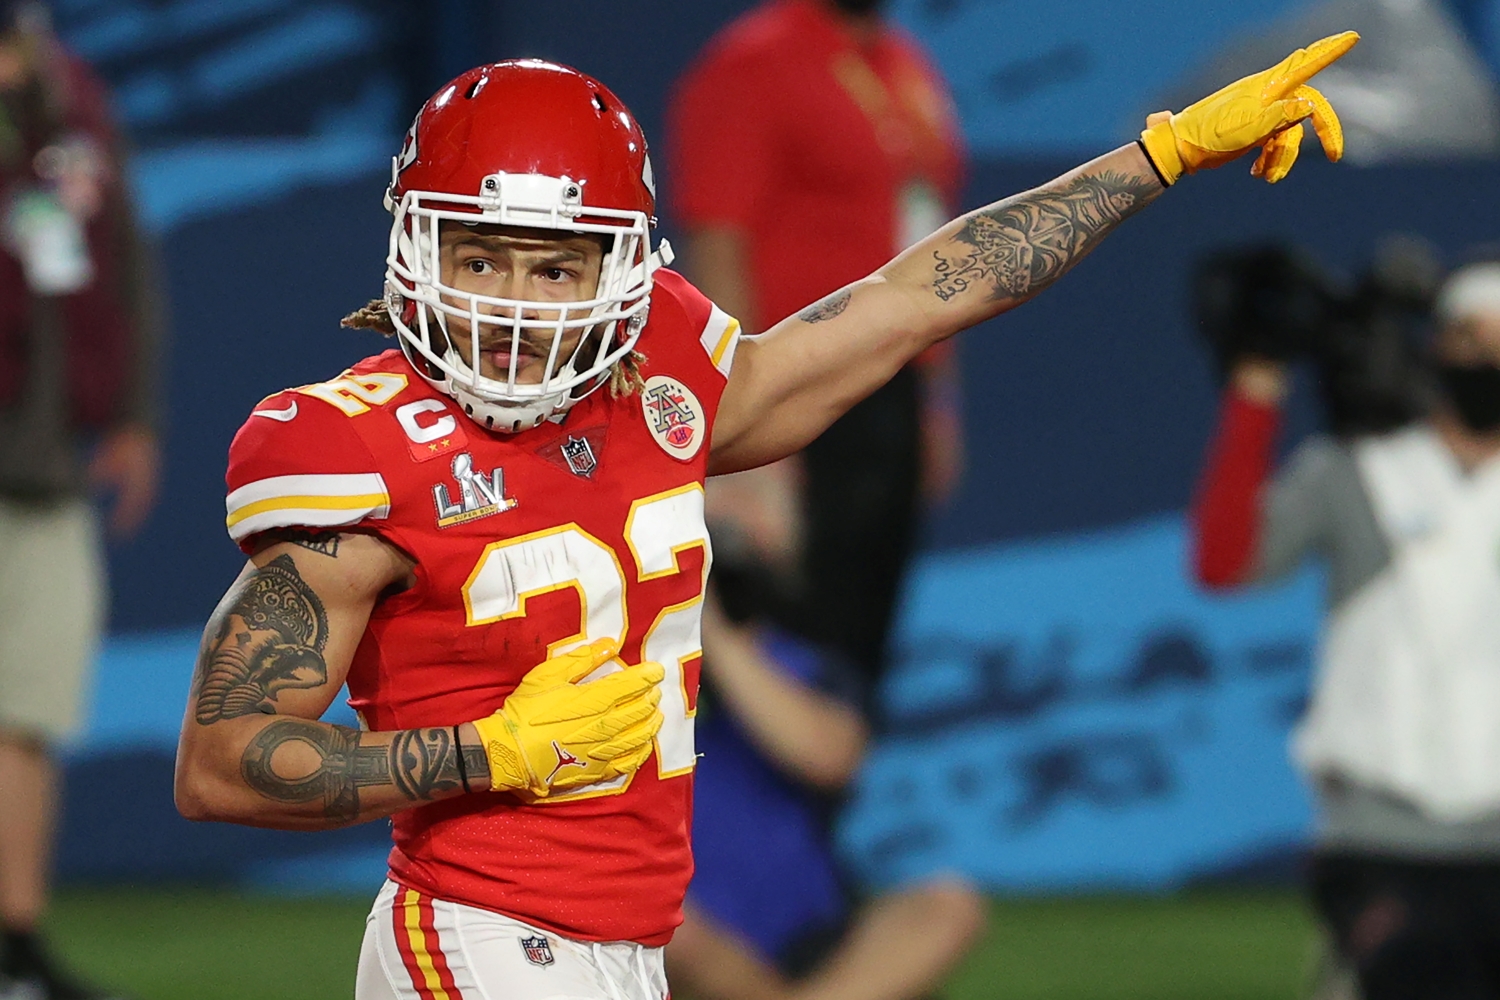 Tyrann Mathieu of the Kansas City Chiefs reacts after a pass interference penalty.